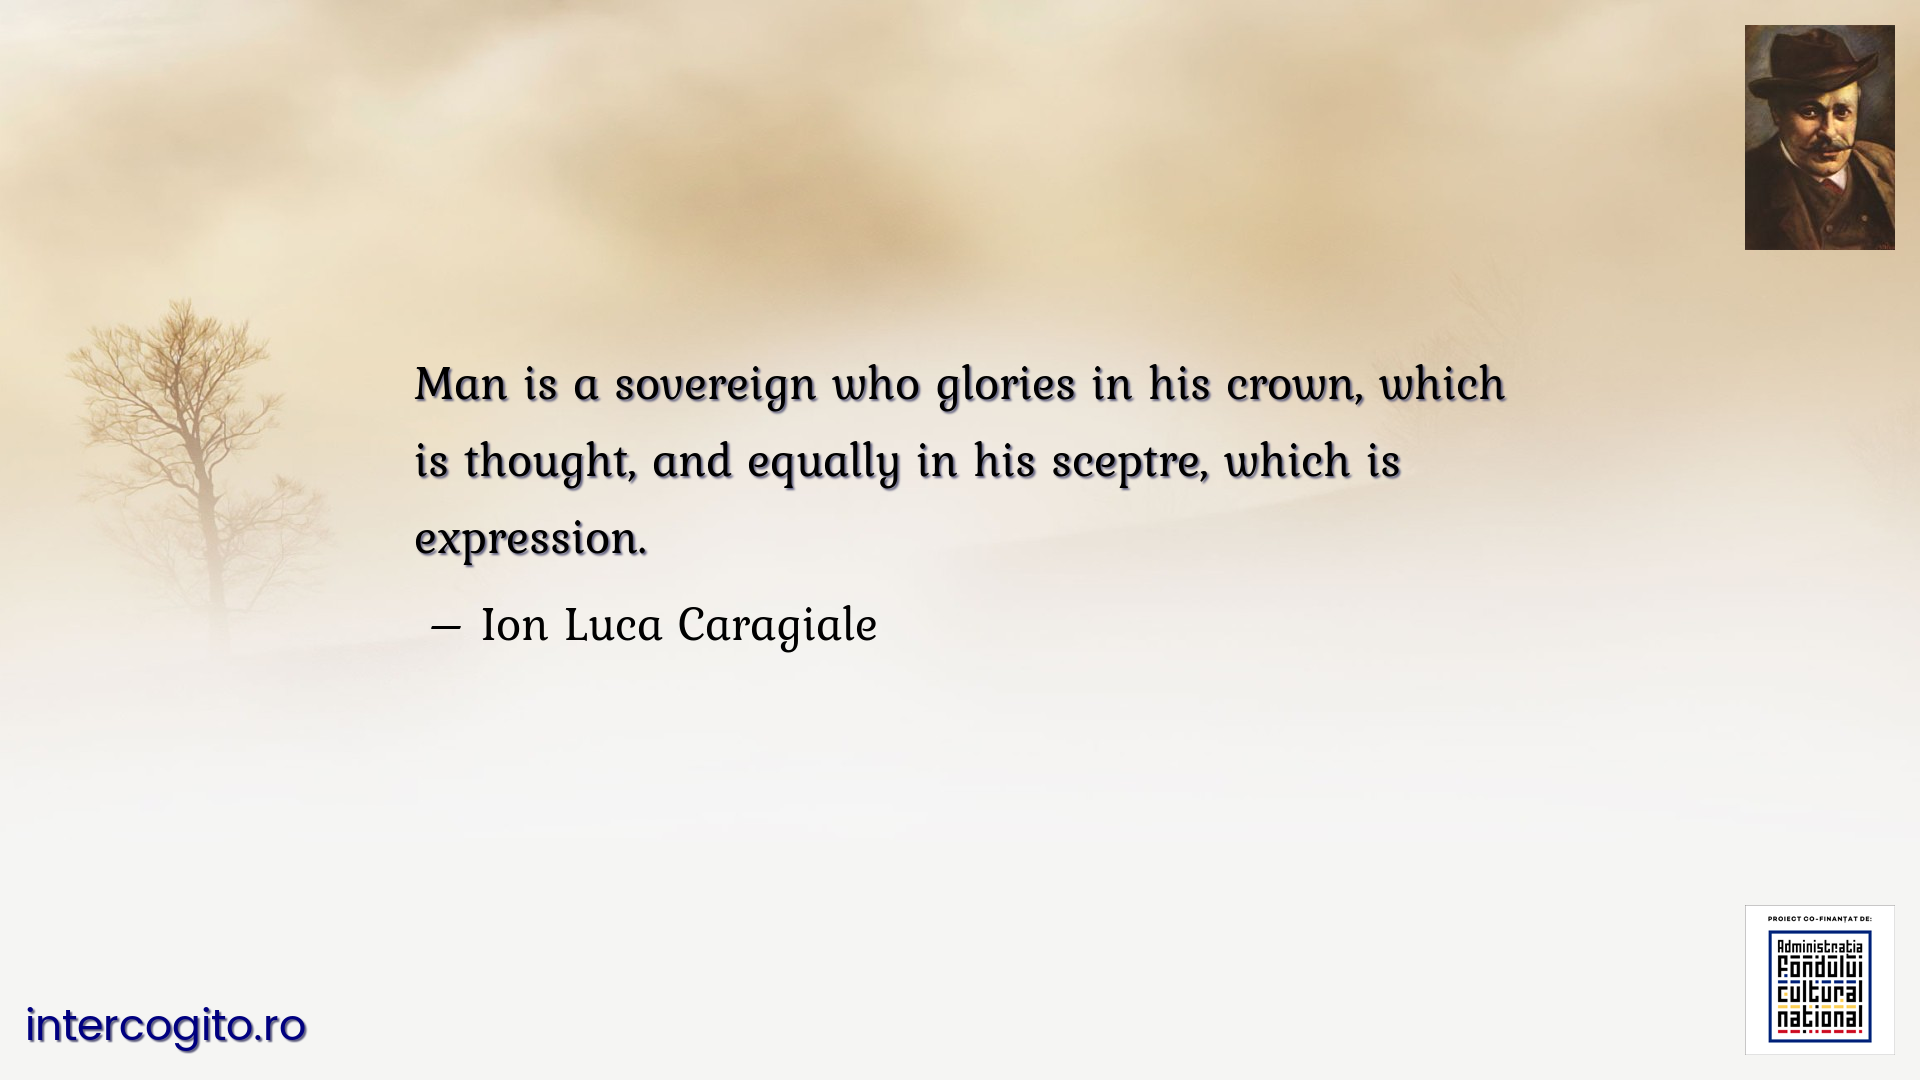 Man is a sovereign who glories in his crown, which is thought, and equally in his sceptre, which is expression.